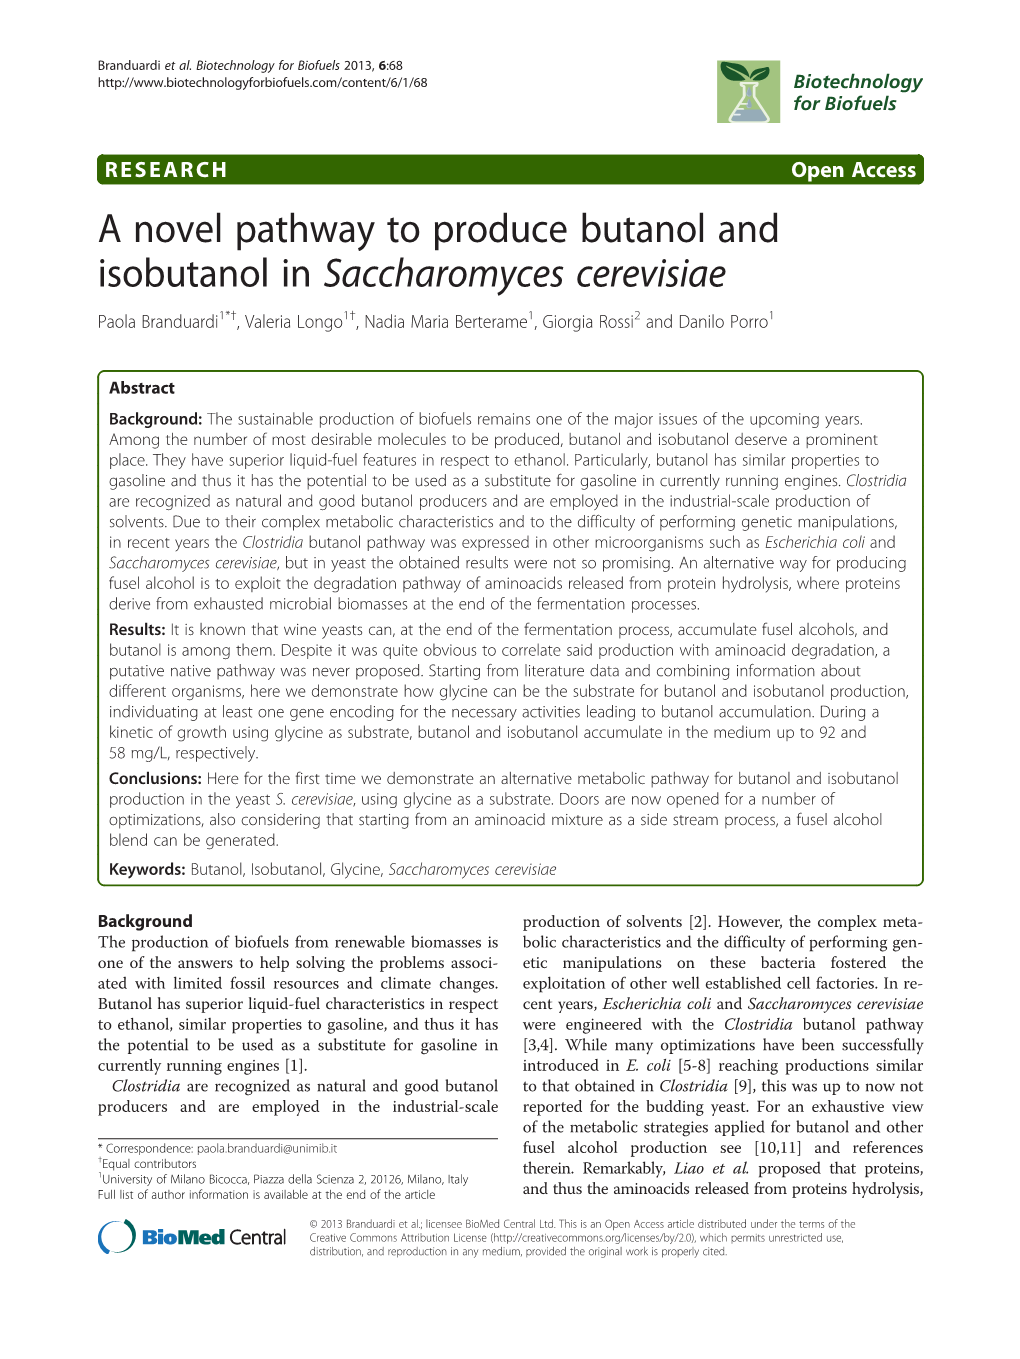 A Novel Pathway to Produce Butanol and Isobutanol in Saccharomyces